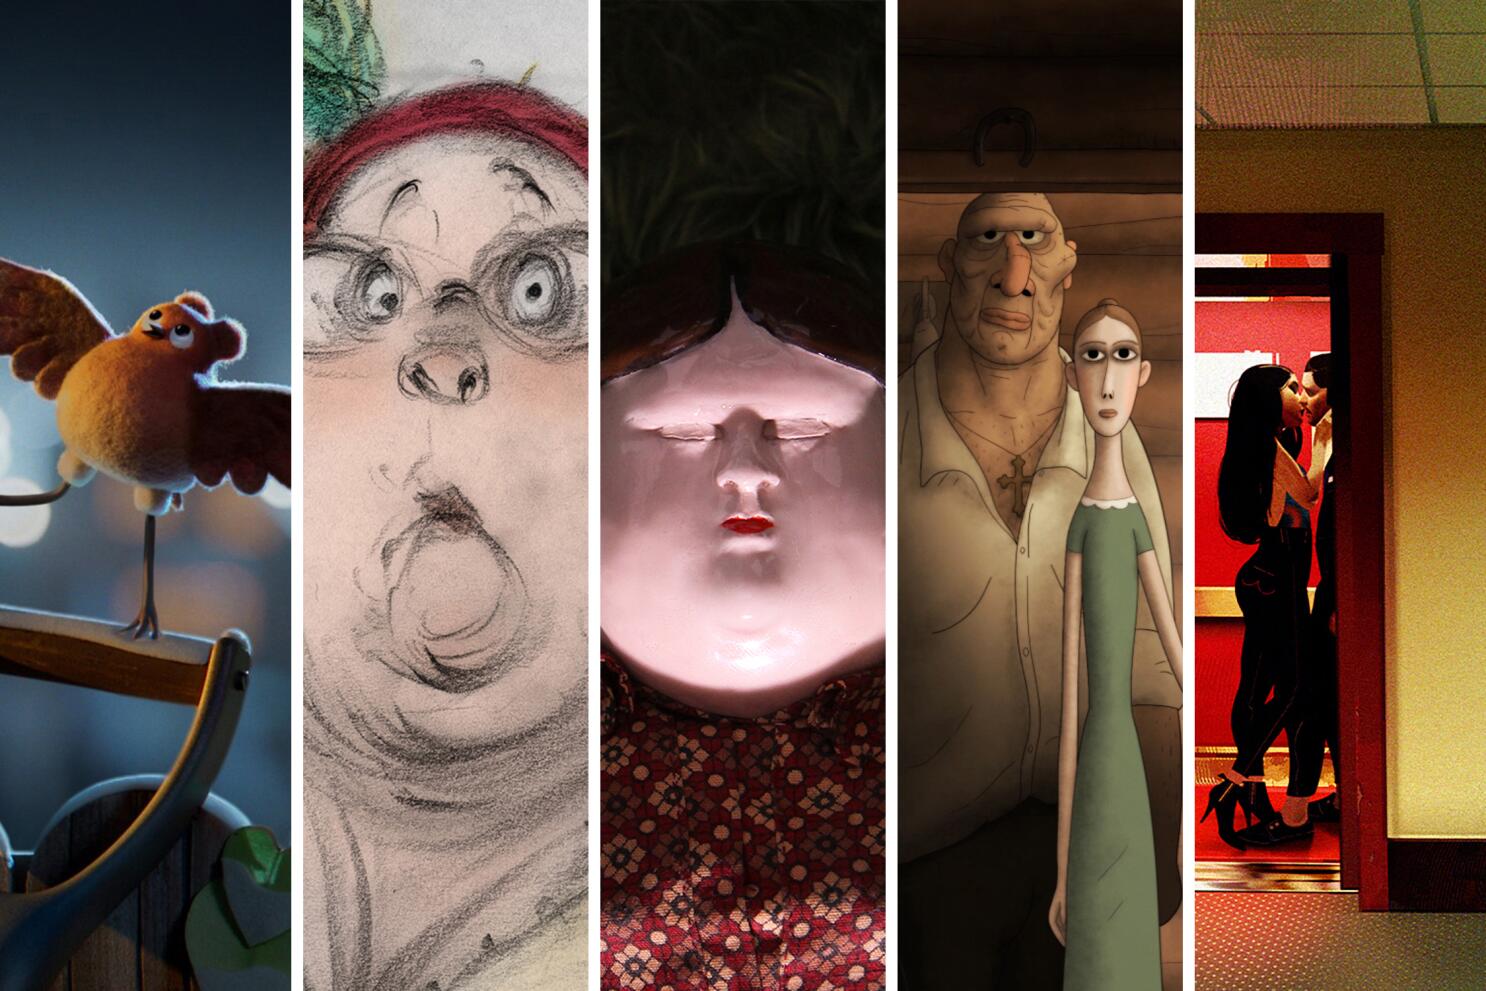 Oscars 2021: Best Animated Shorts Predictions